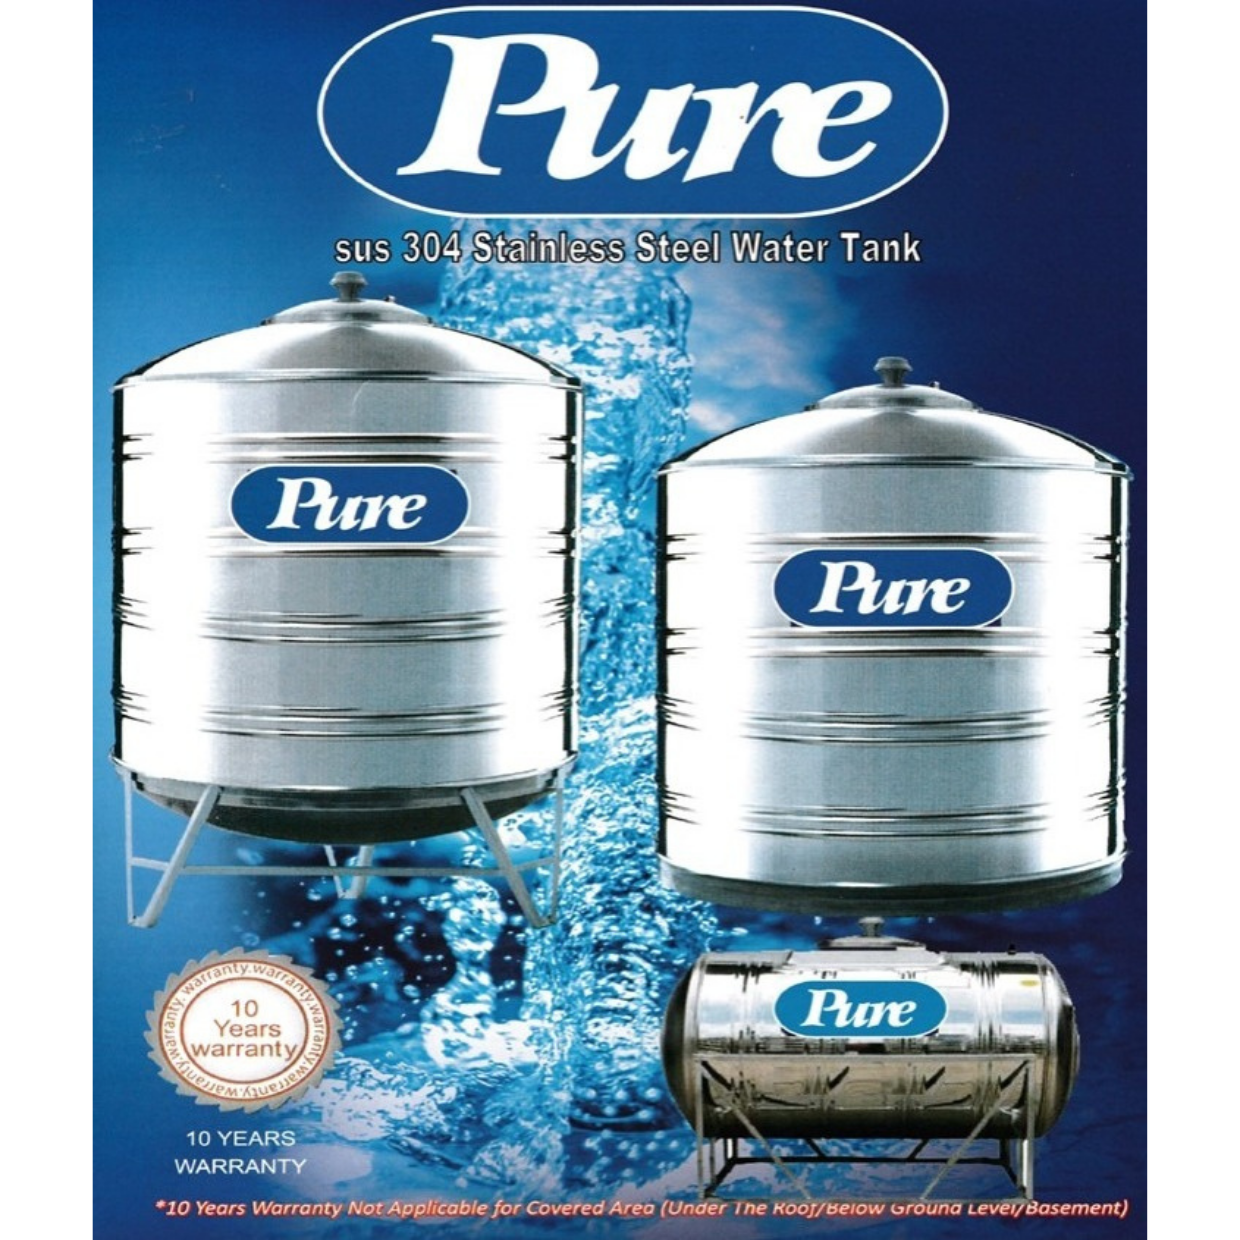 PURE SUS 304 STAINLESS STEEL WATER TANK ROUND BOTTOM SERIES